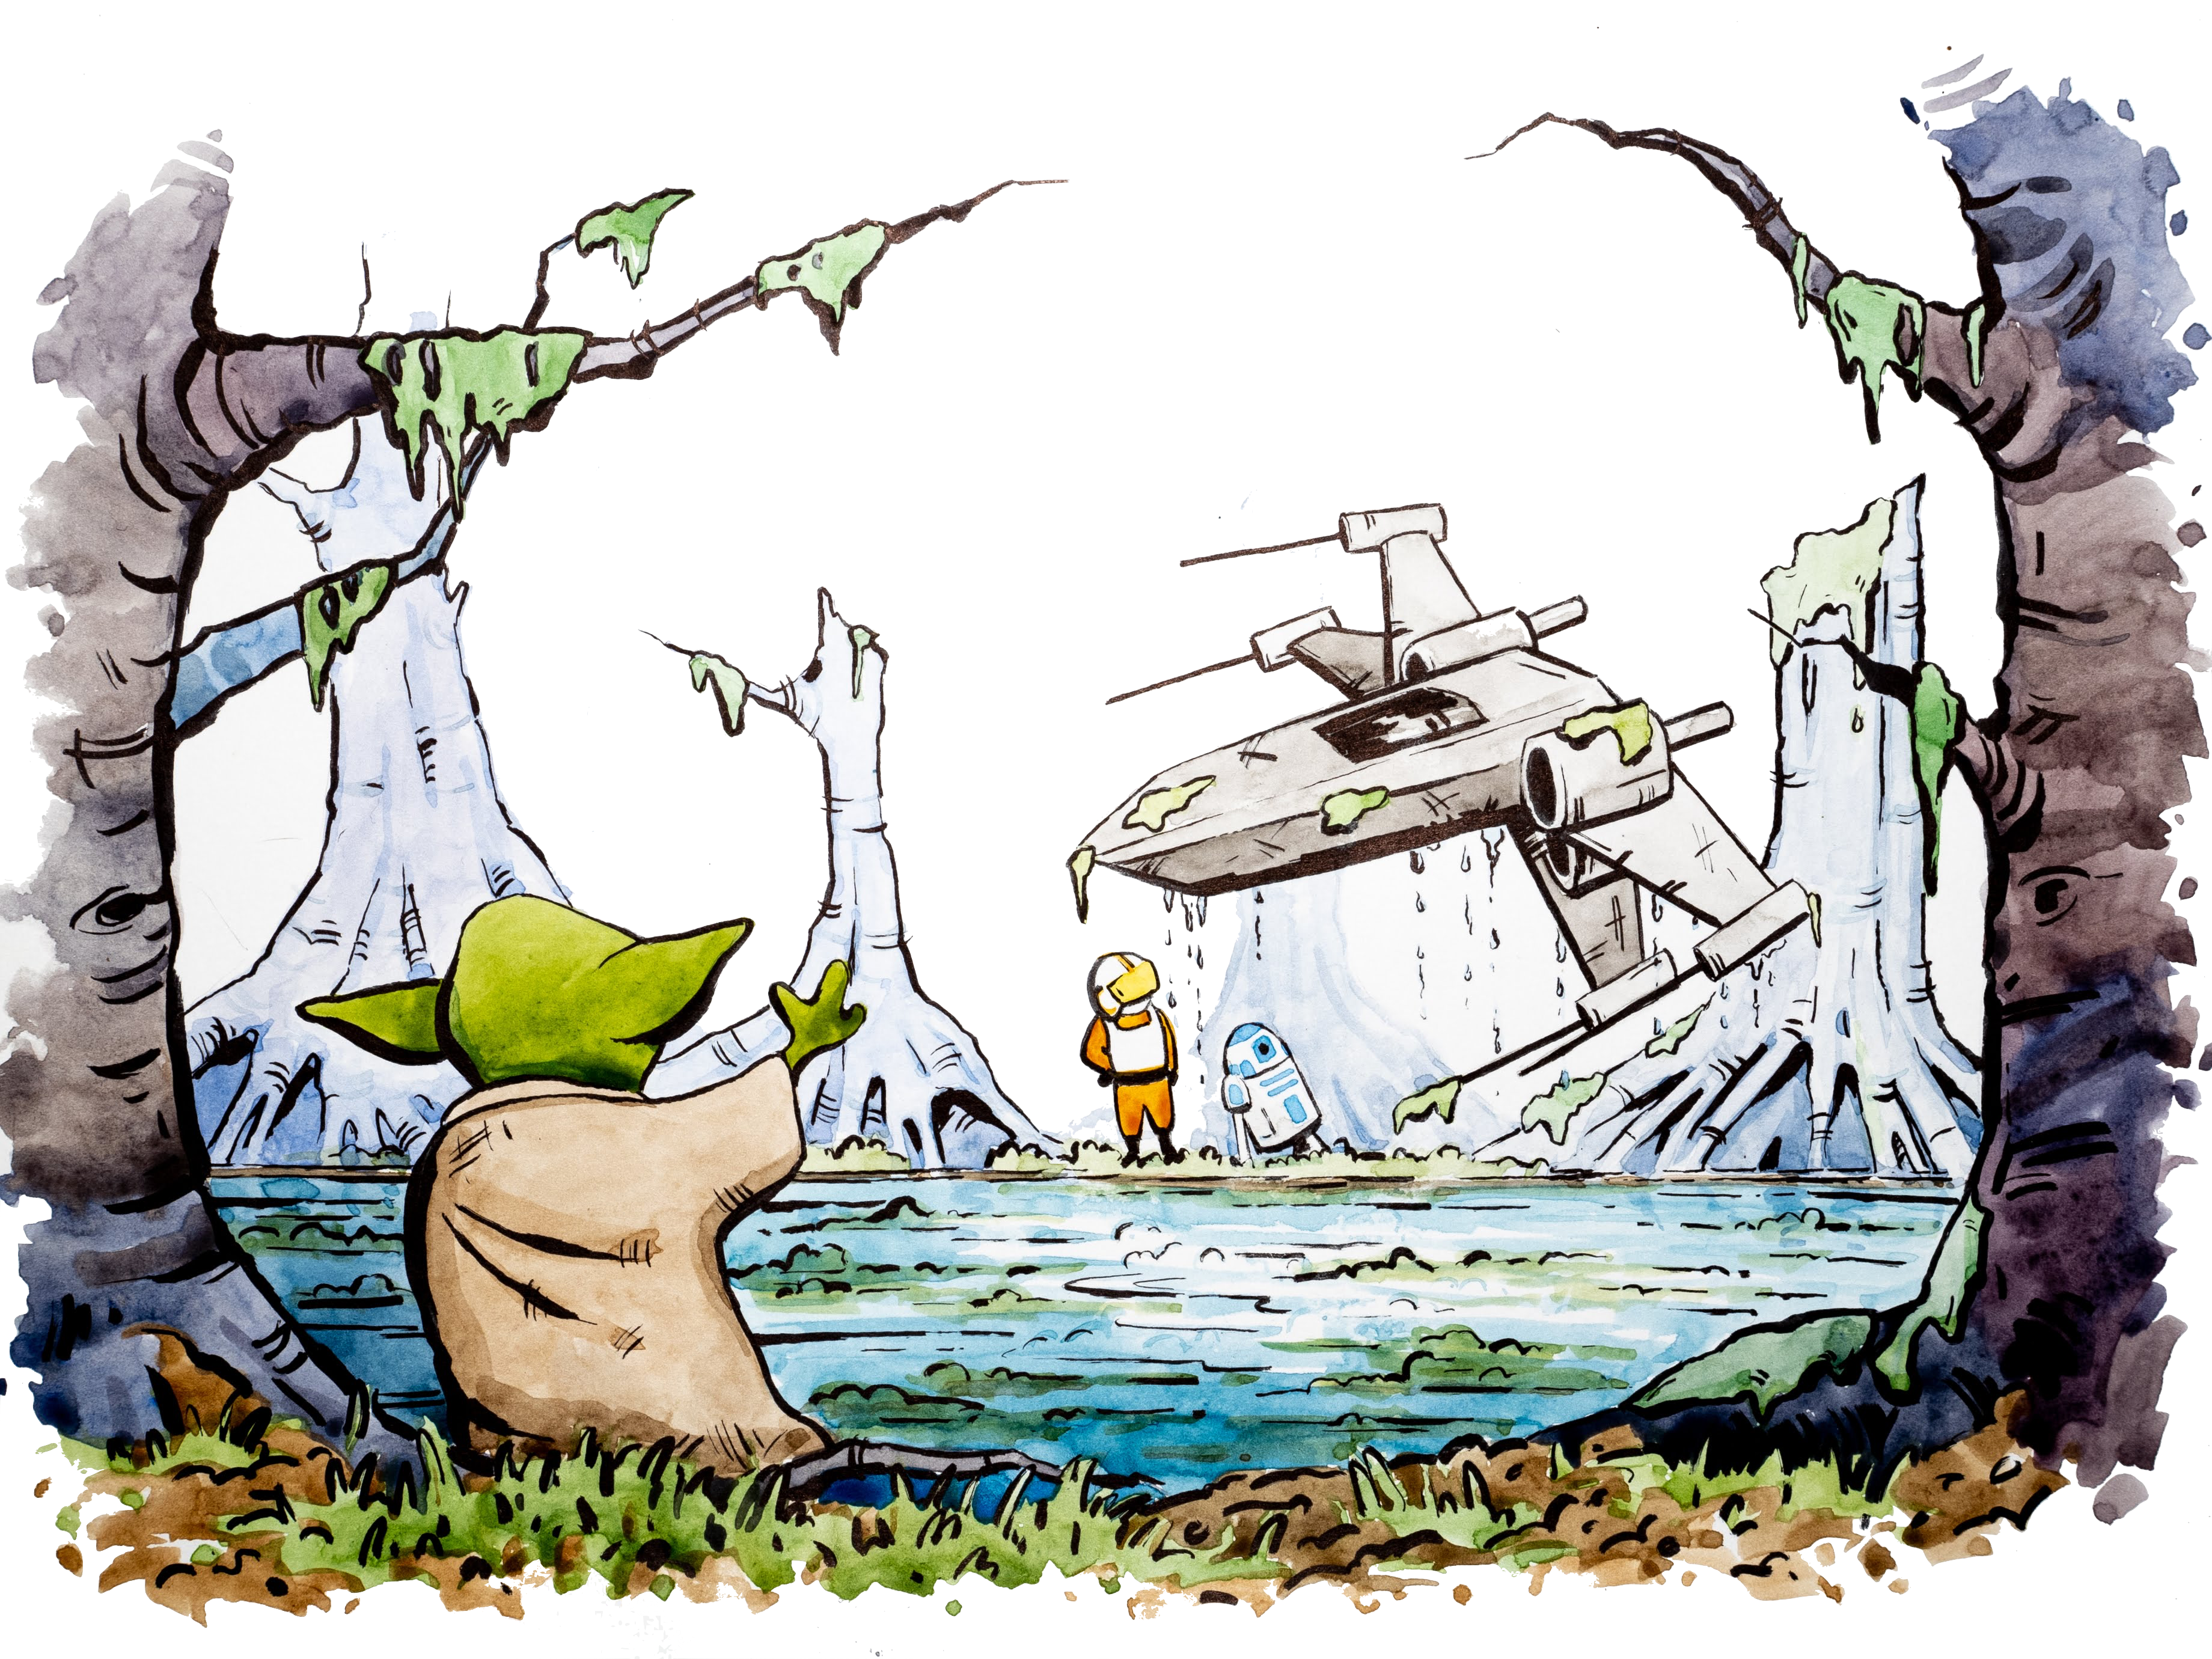 In the foreground, Yoda stands facing towards the bog and his right arm outstretched. In the background, Luke and R2D2 stand on the opposite bank looking up at the X-wing, which hovers just above the water's surface. Water and bog vegetation drip off of it.